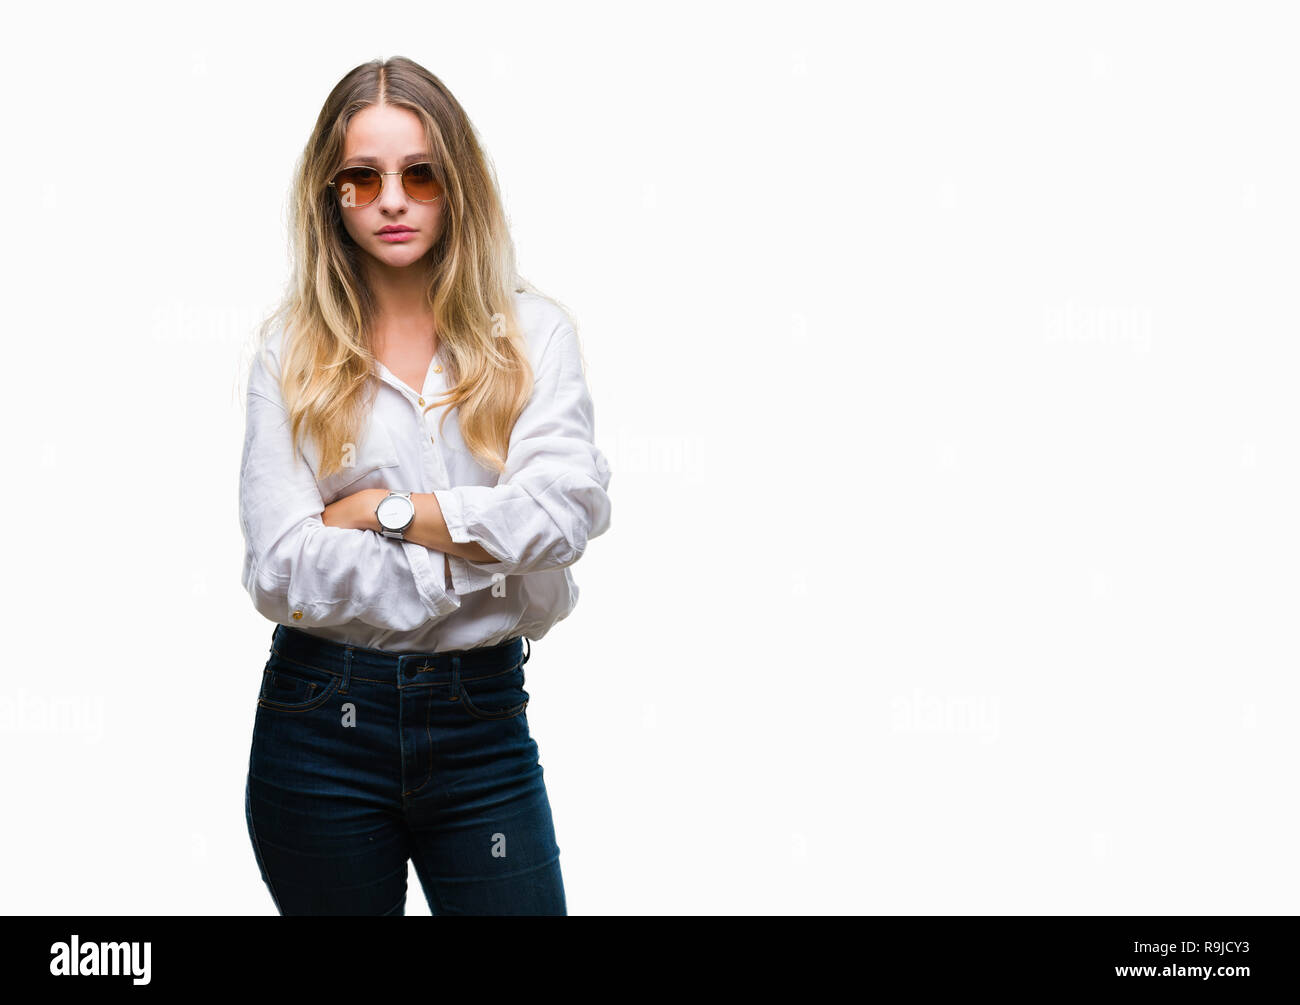 Young beautiful blonde woman wearing sunglasses over isolated background skeptic and nervous, disapproving expression on face with crossed arms. Negat Stock Photo